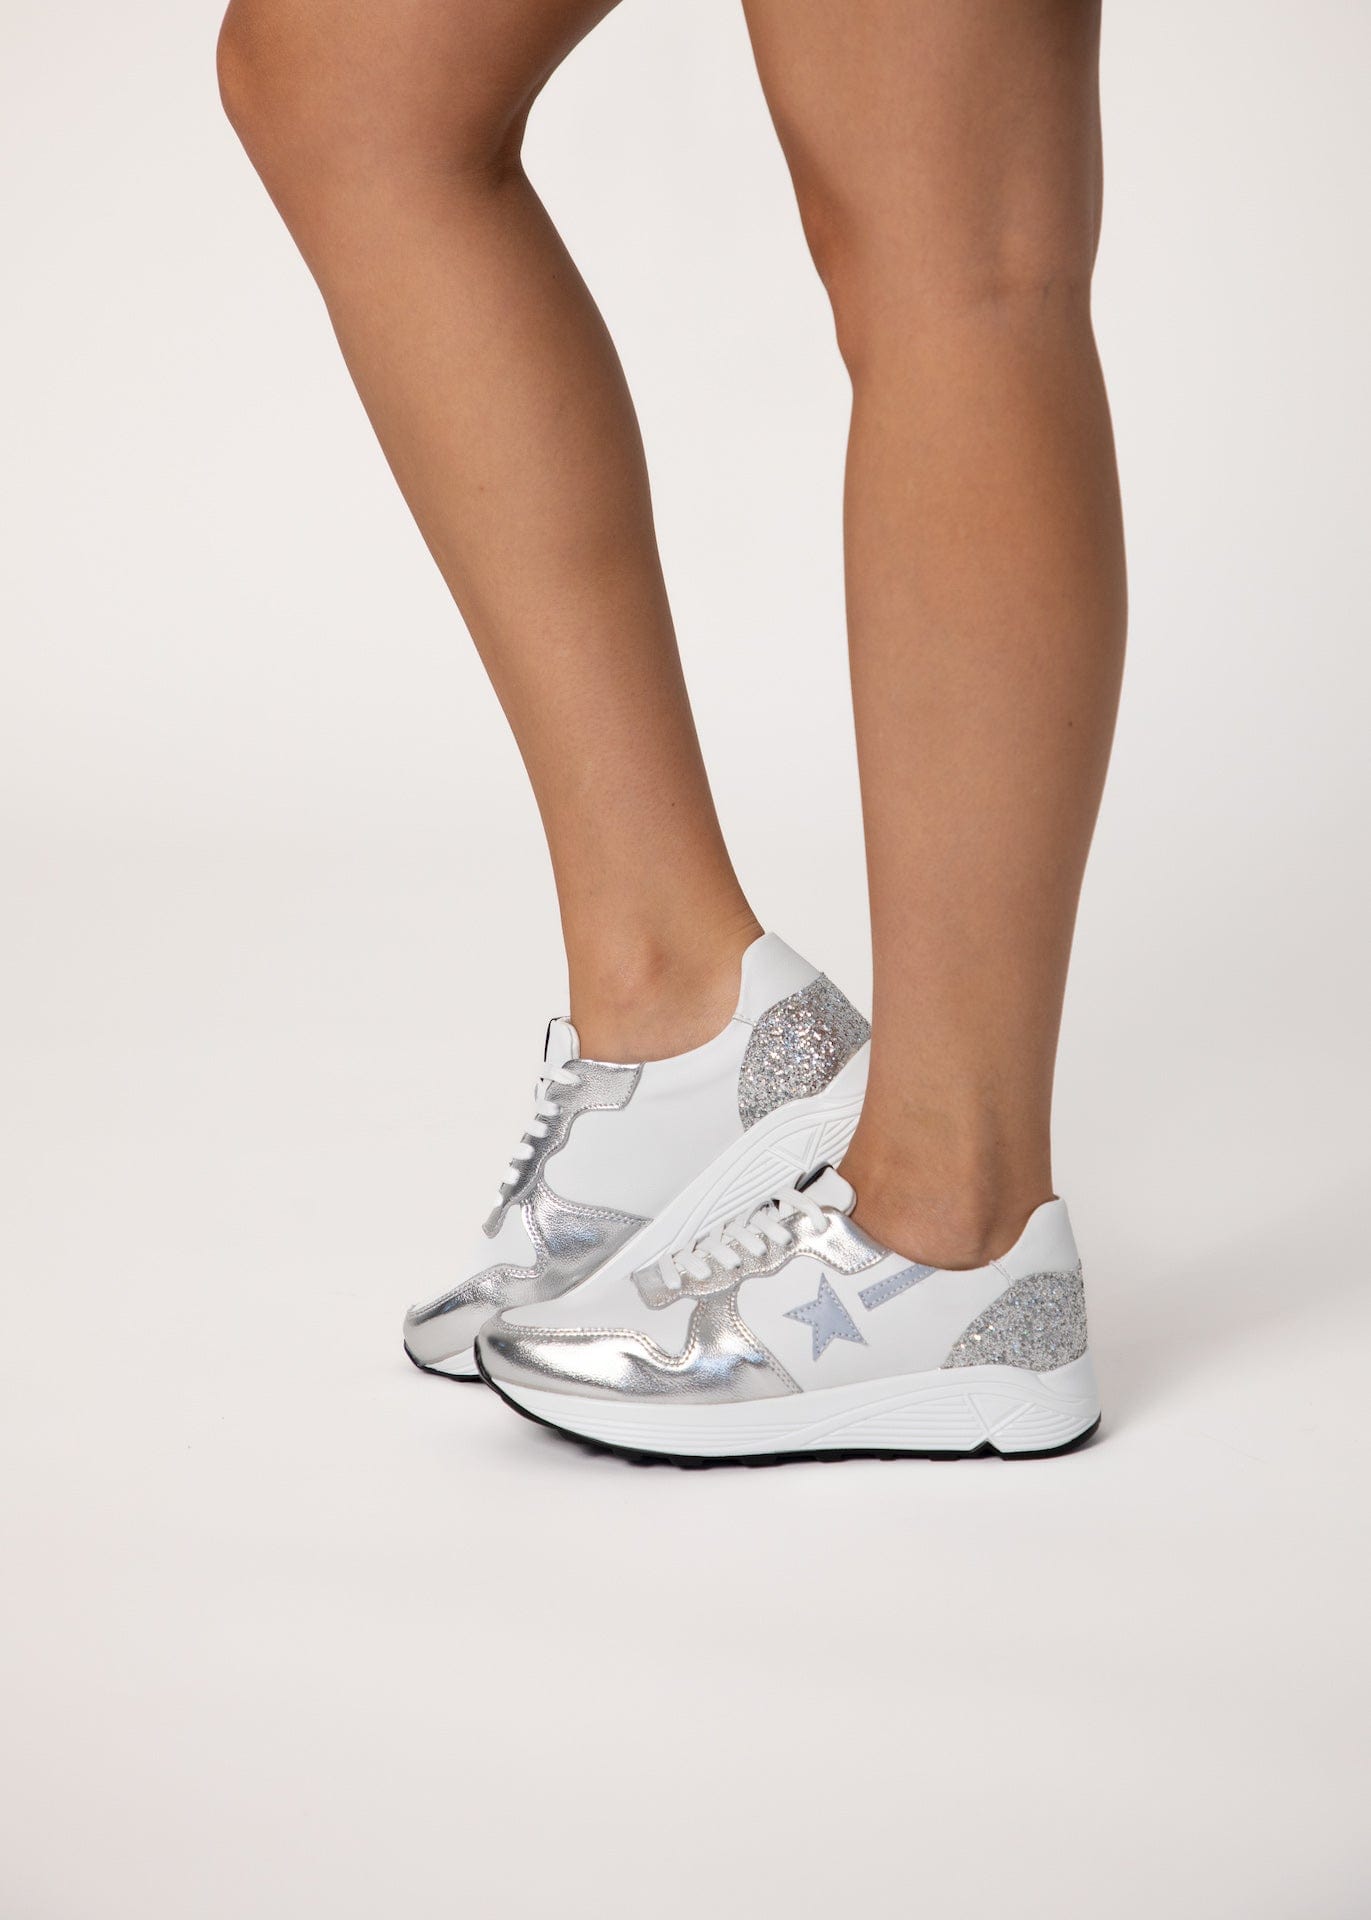 Leather Sneaker in Silver Glitter and White - Tribute StoreJulz